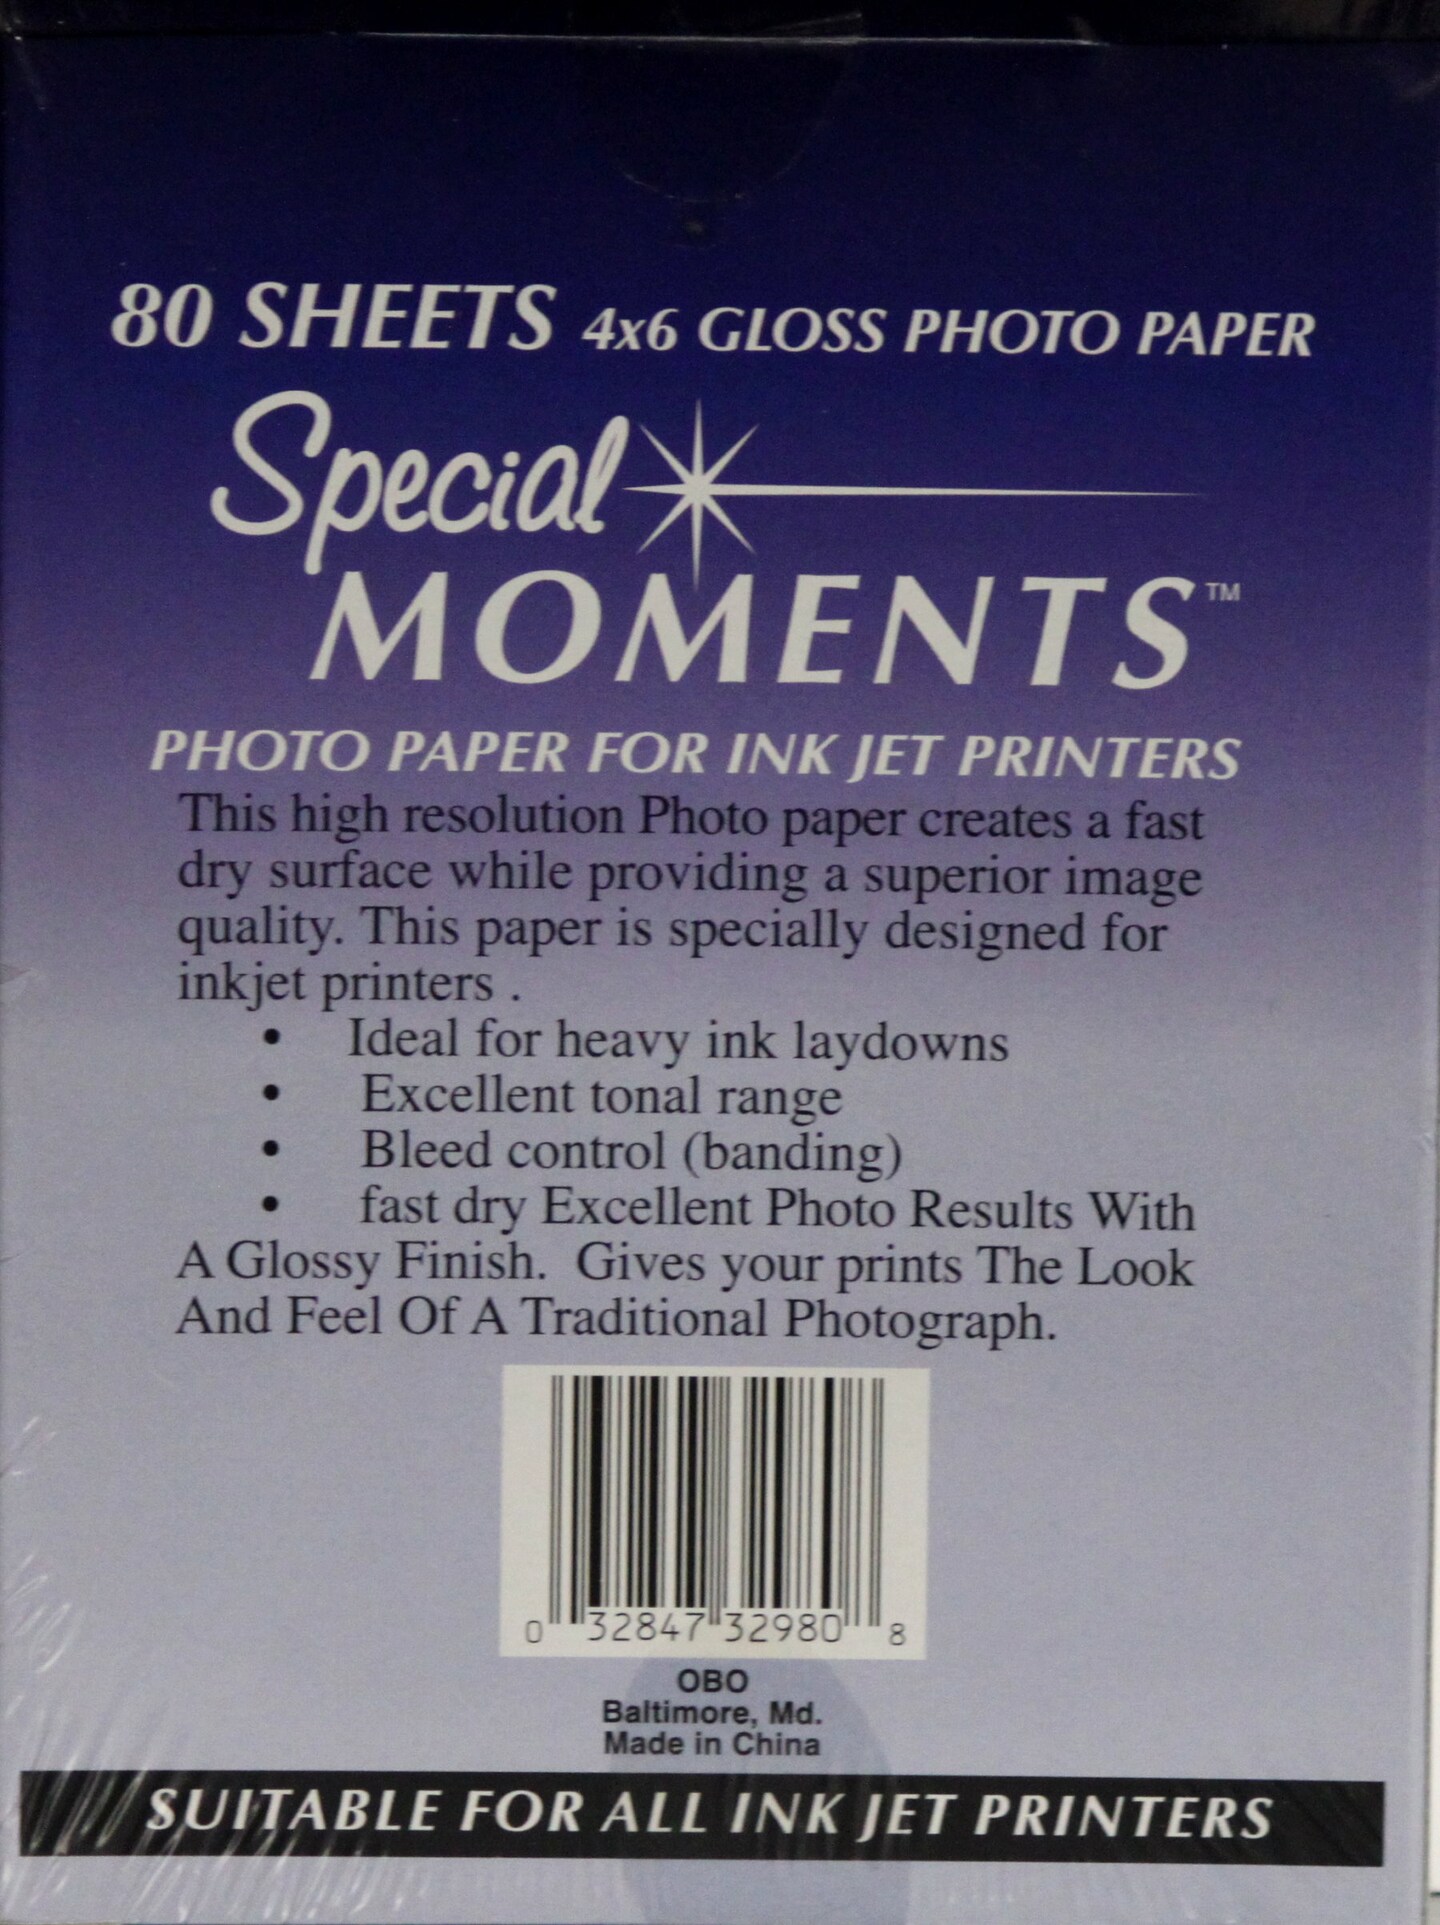 Special Moments High Gloss 4 x 6 Photo Paper